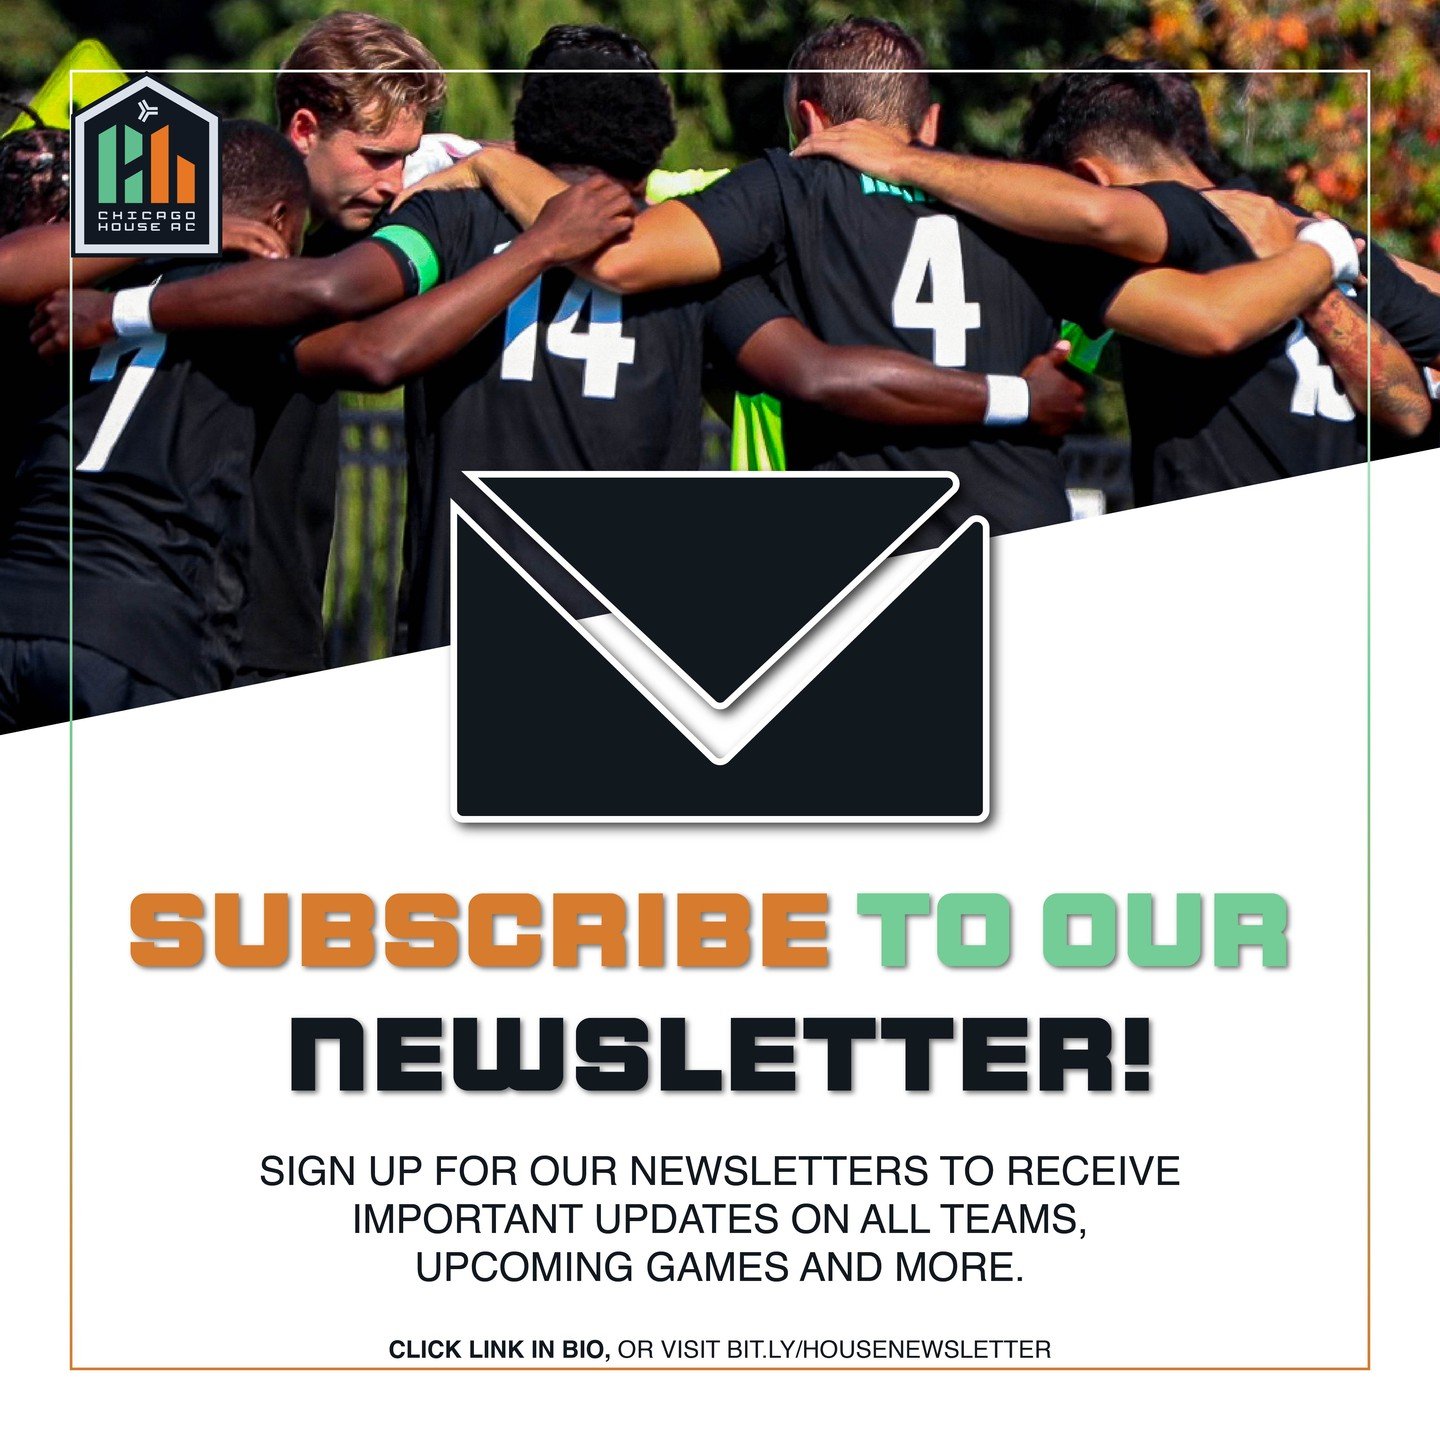 Stay up to date with all things Chicago House - Men's &amp; Women's first teams, U23's, Academy &amp; Futsal - by signing up for our newsletter at bit.ly/housenewsletter.
#OurCityOurHouse #UpTheHouse #CHAC 🧡🖤💚🏡